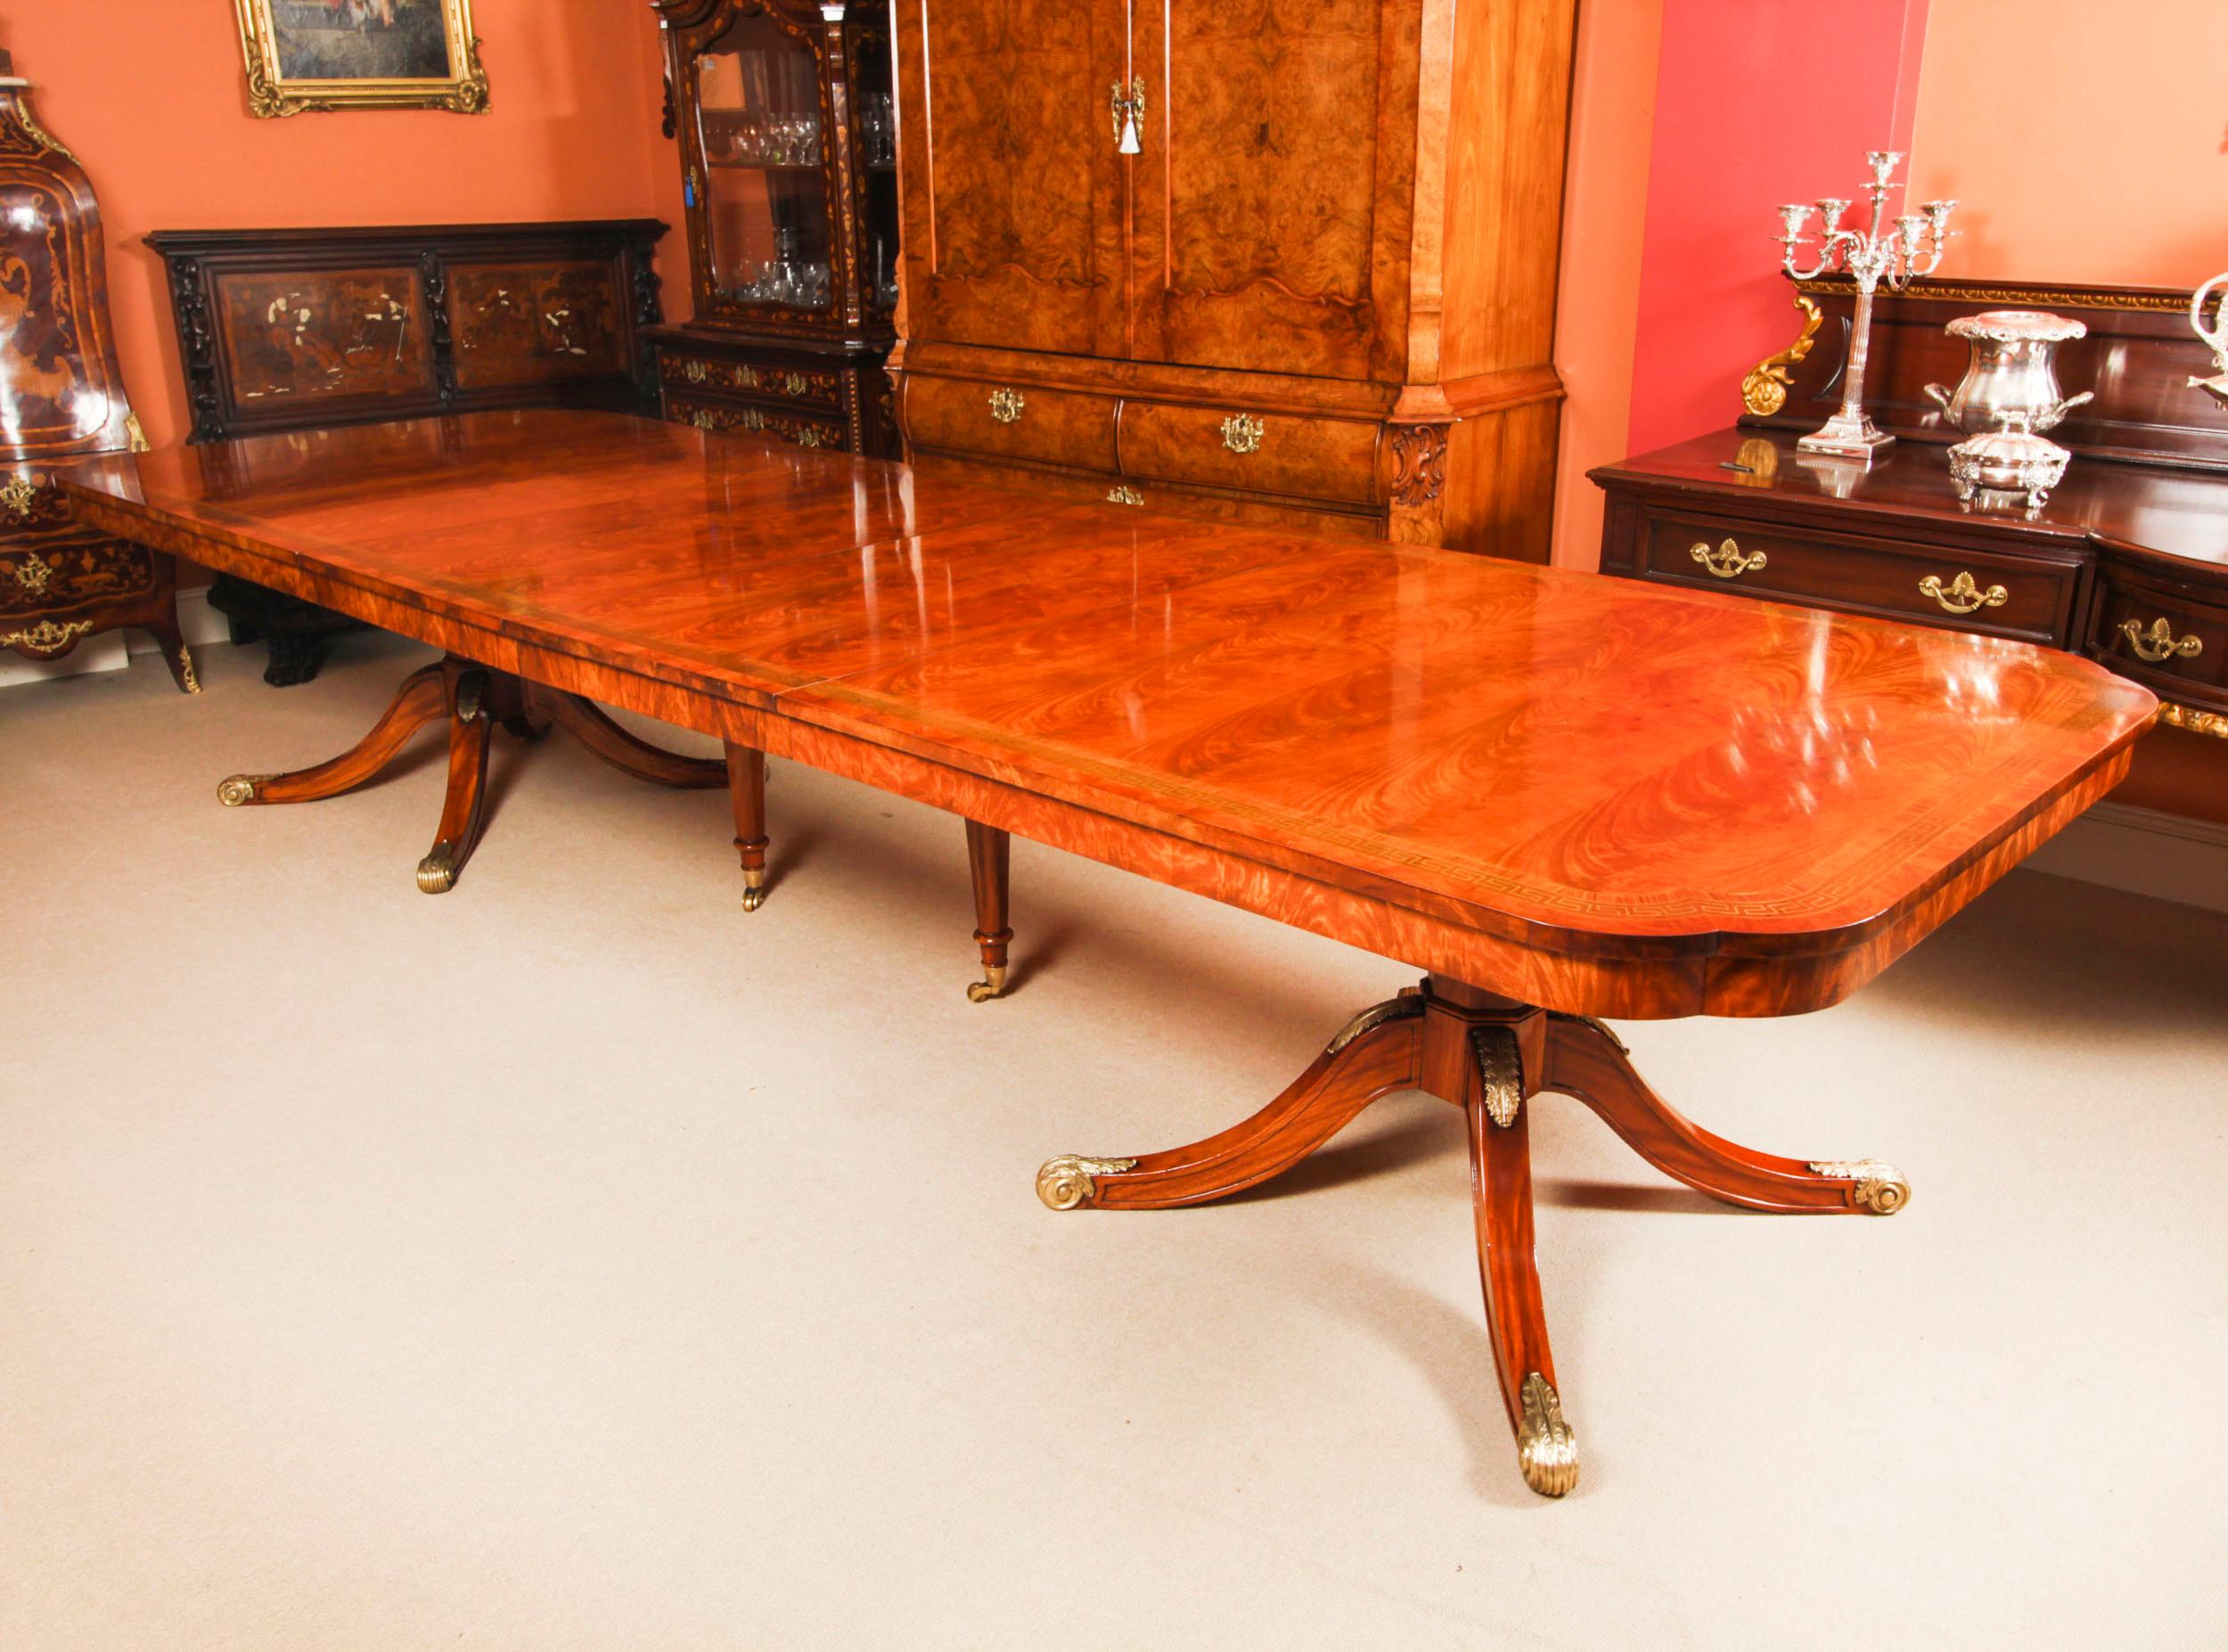 Regency Revival Vintage Brass Inlaid Dining Table & 14 Shield Back Chairs, 20th Century